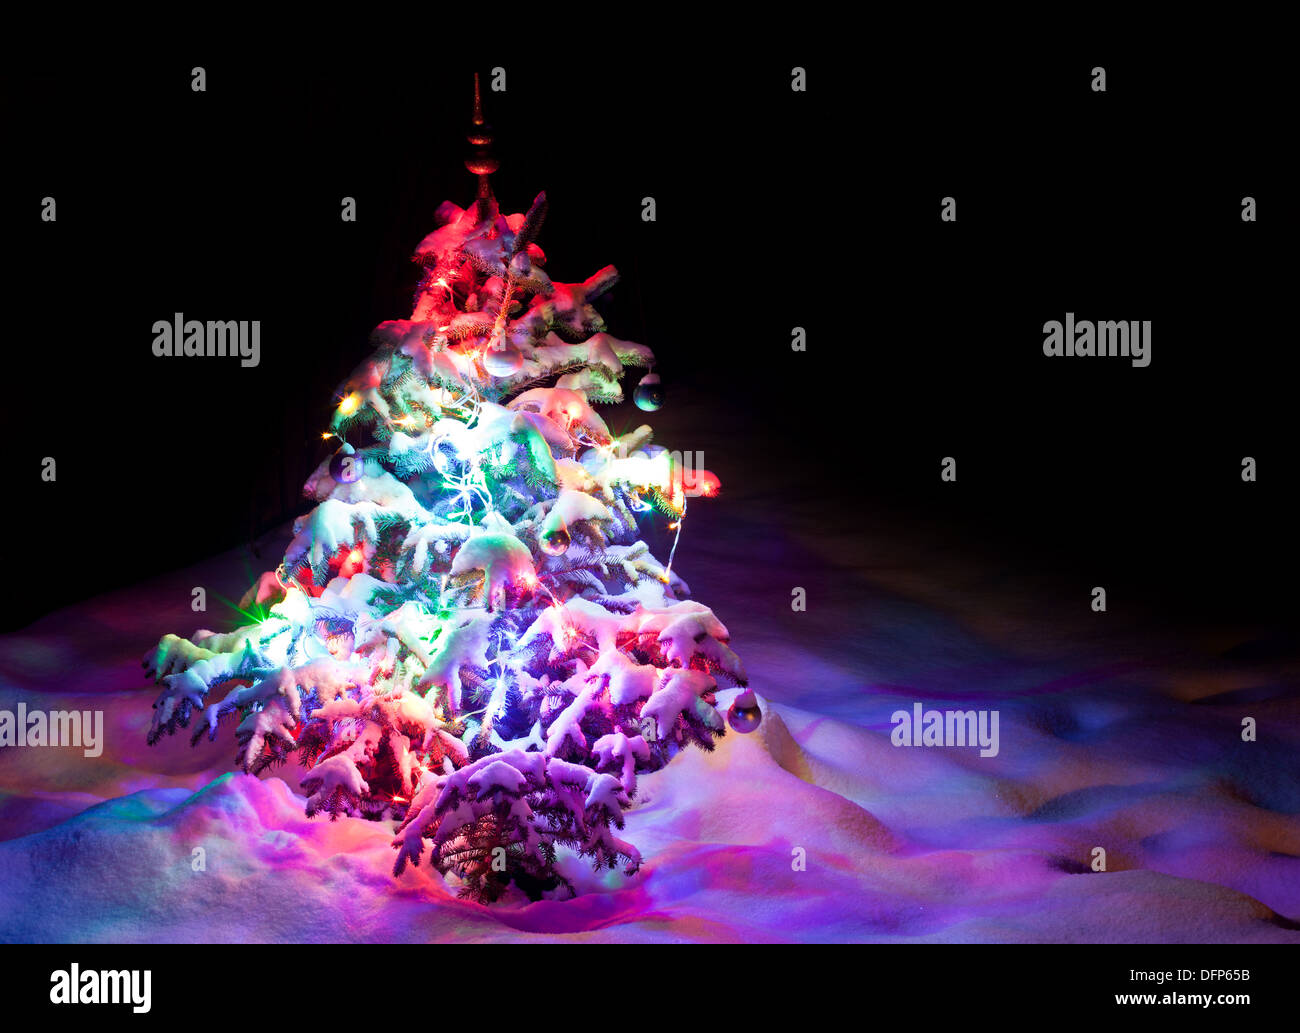 Luminous New Year's tree in the banks of snow. Stock Photo